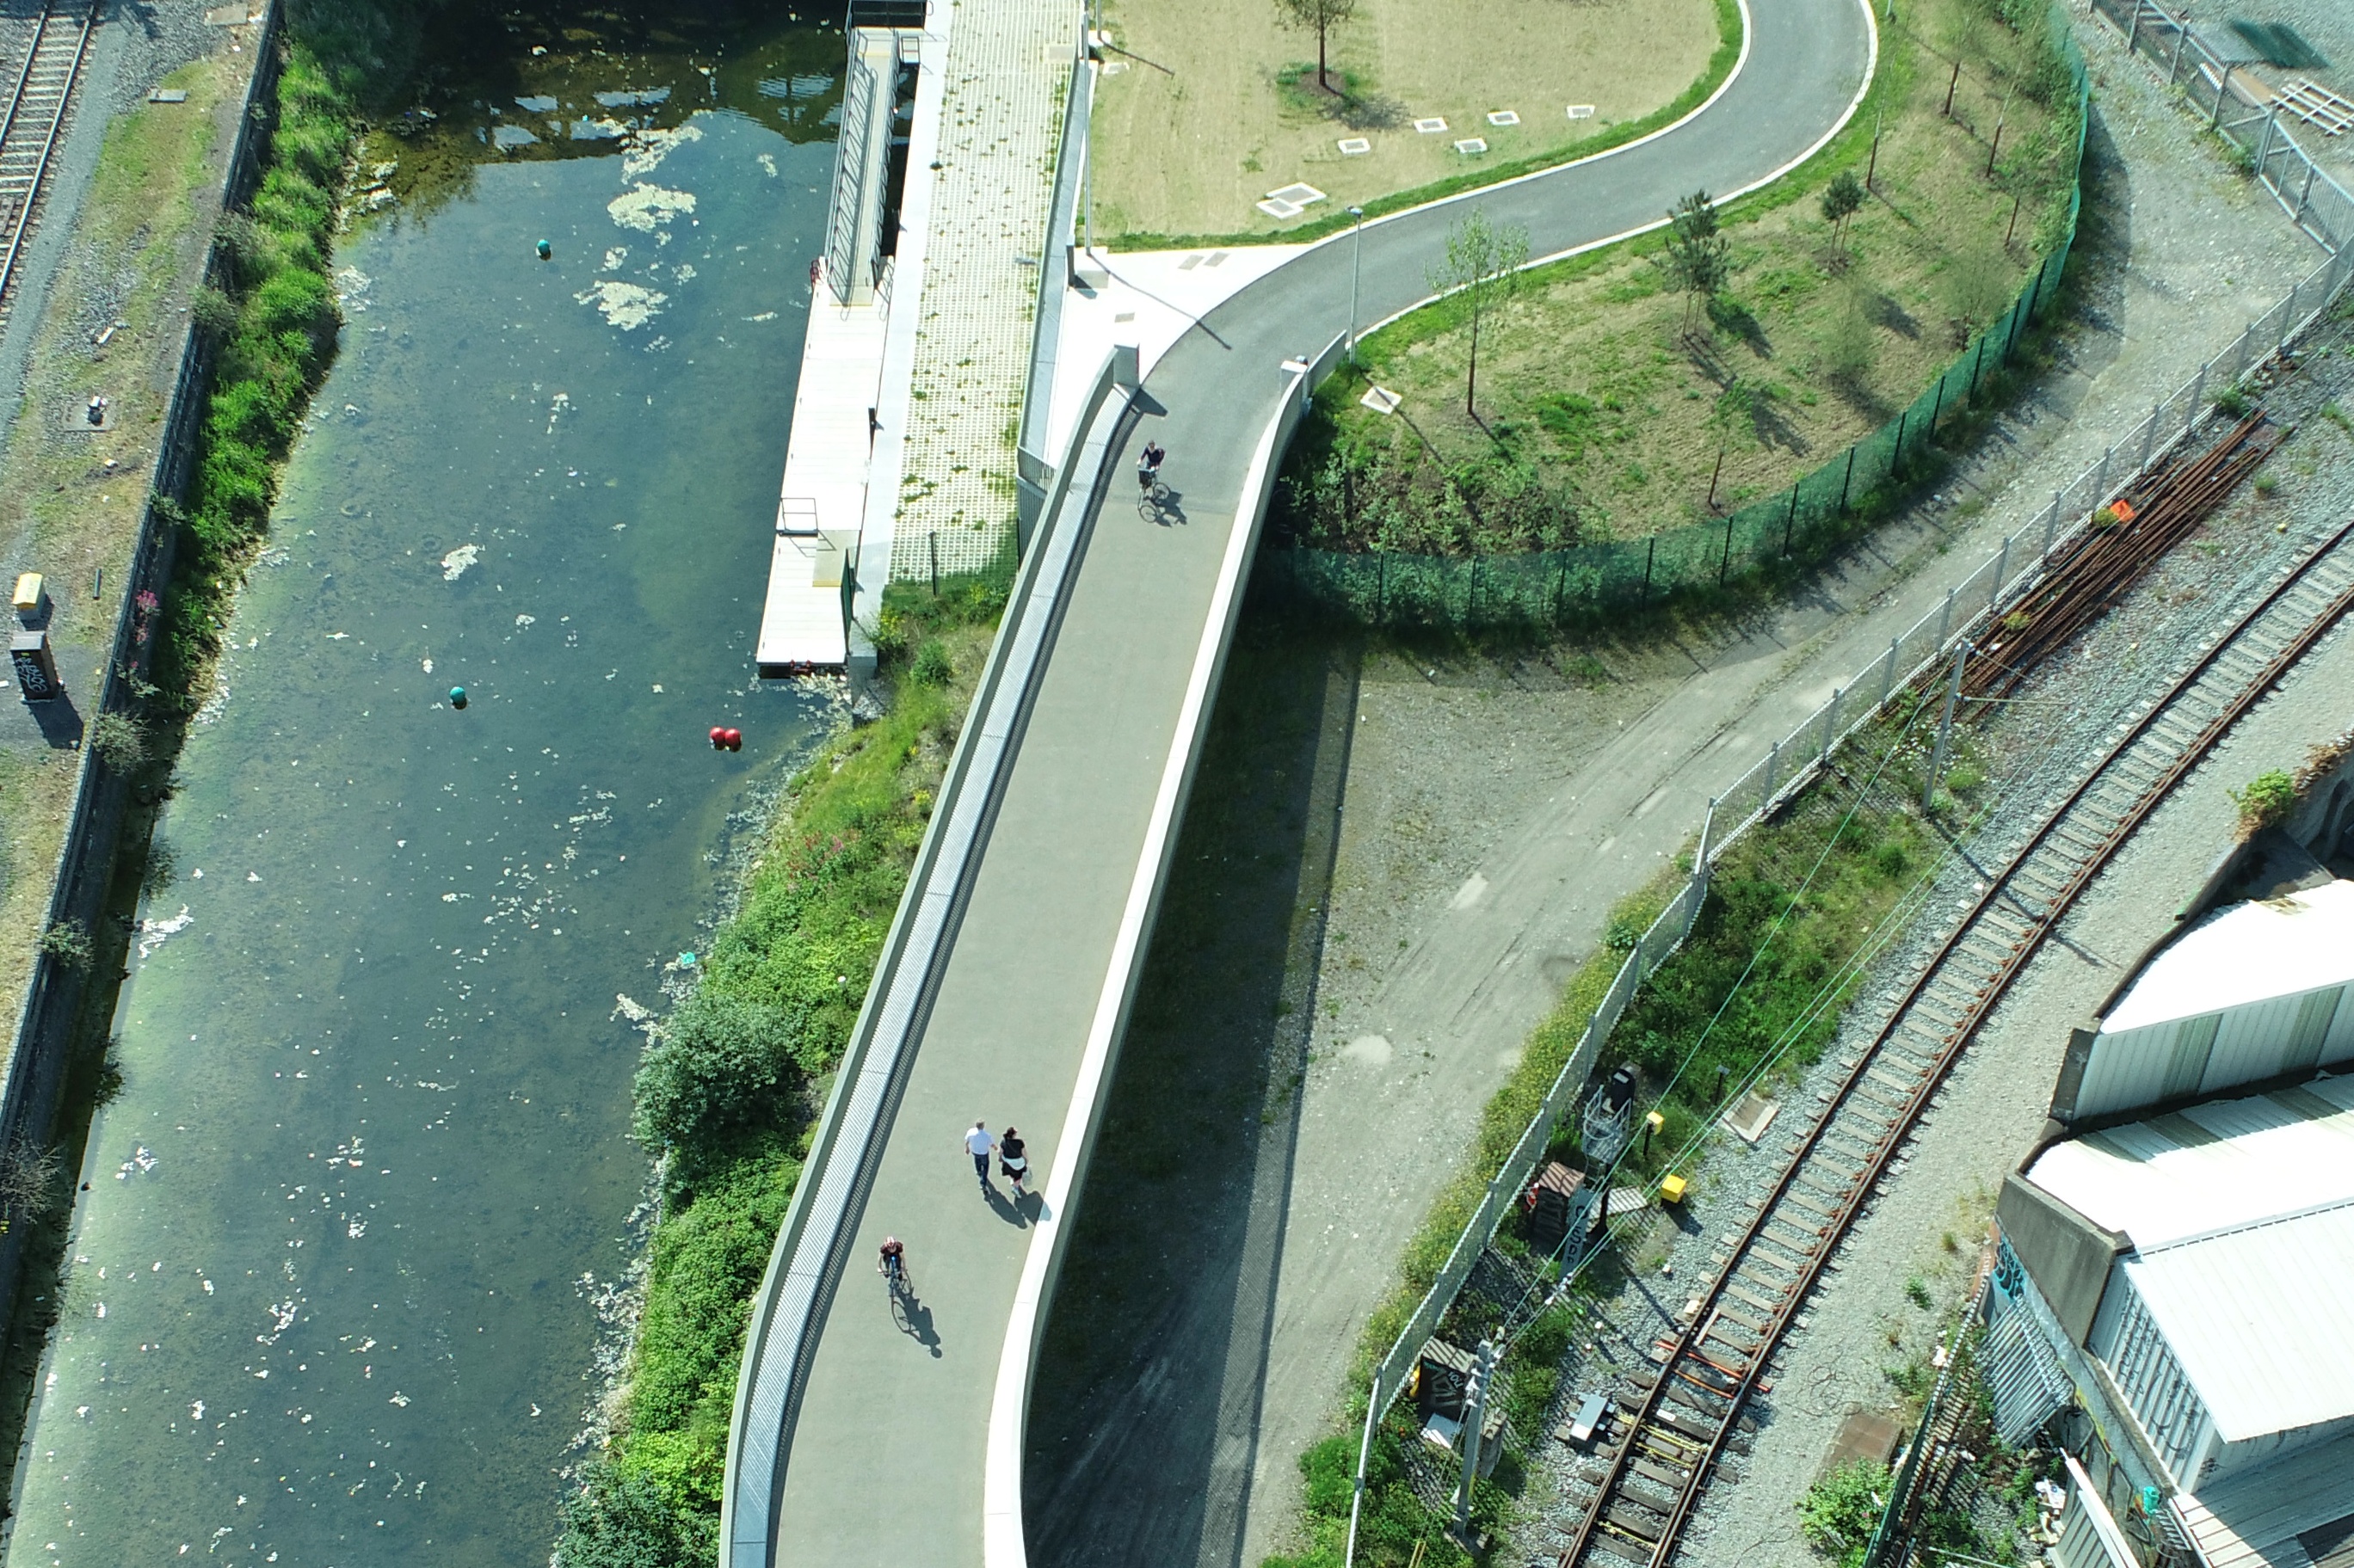 Aerial view of Royal Canal premium cycle route